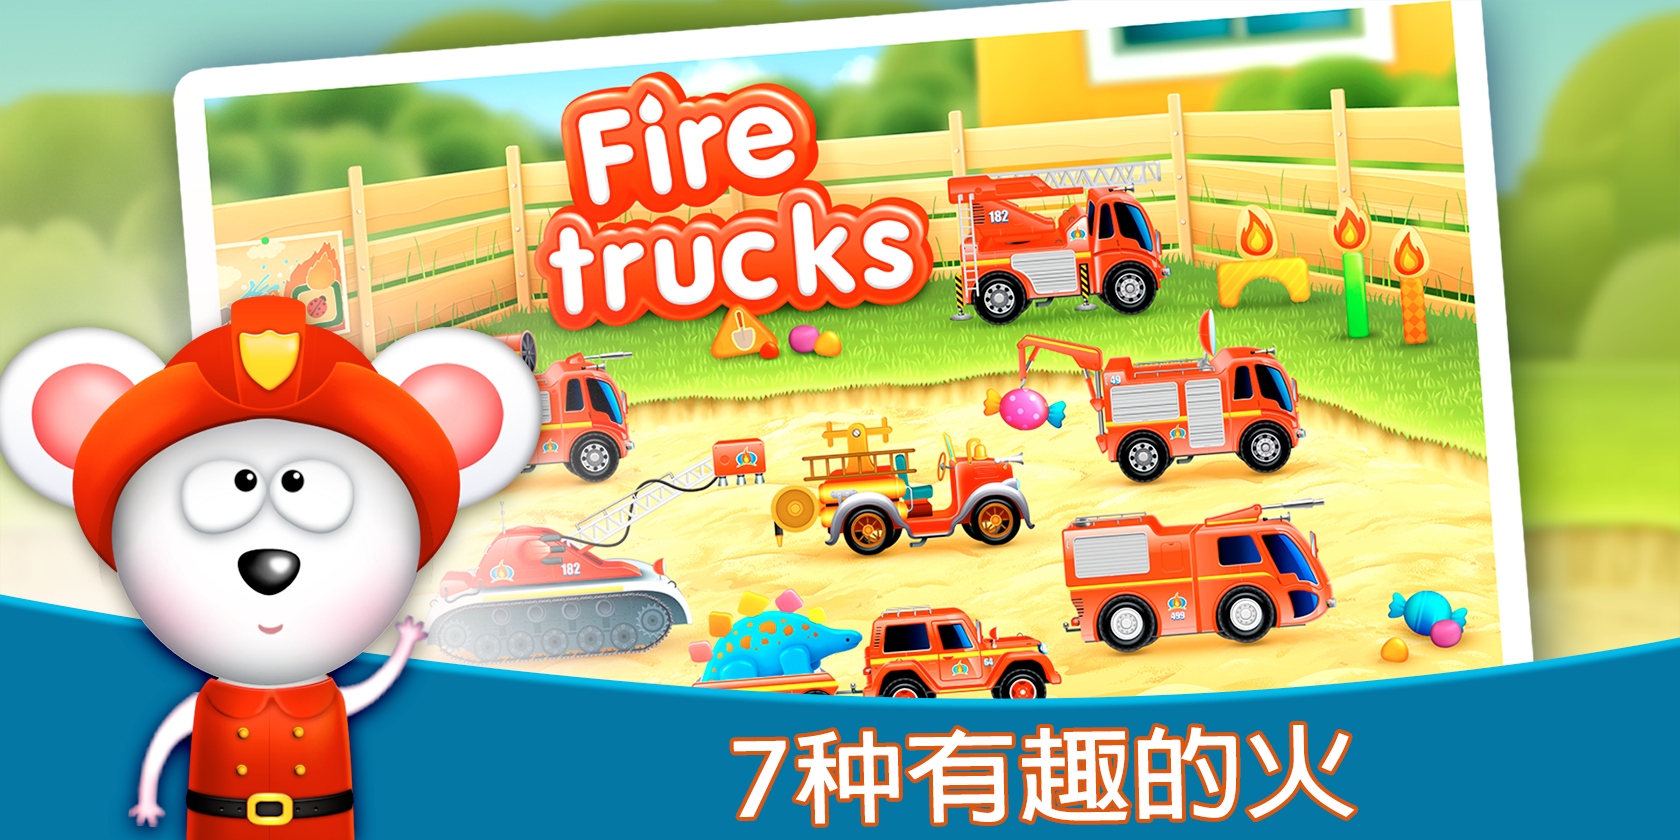 Android application Firetrucks: rescue for kids screenshort